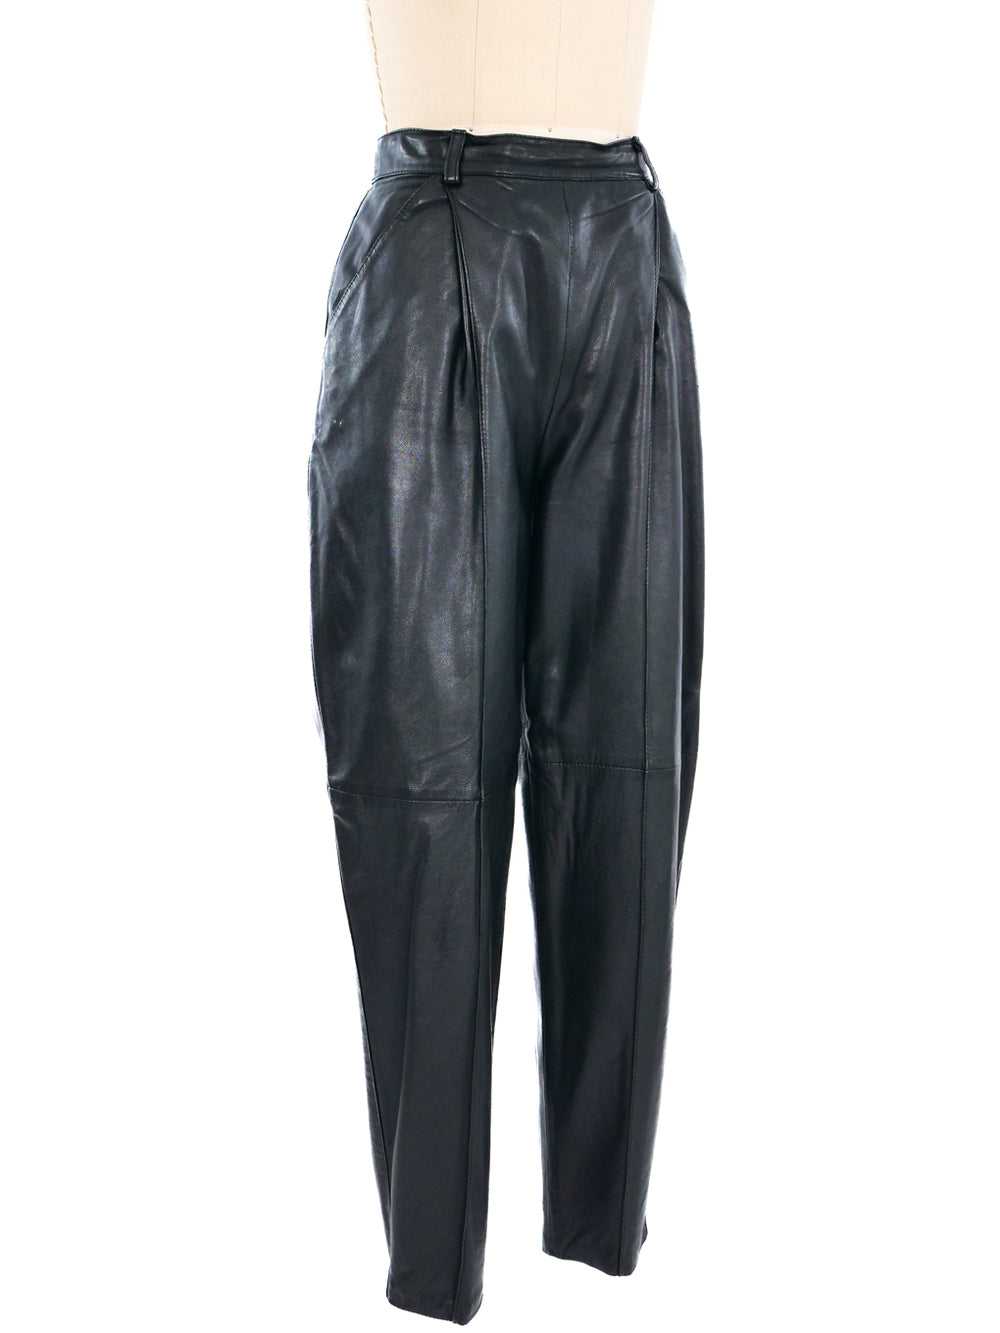 Versus By Gianni Versace Leather Trousers - image 4